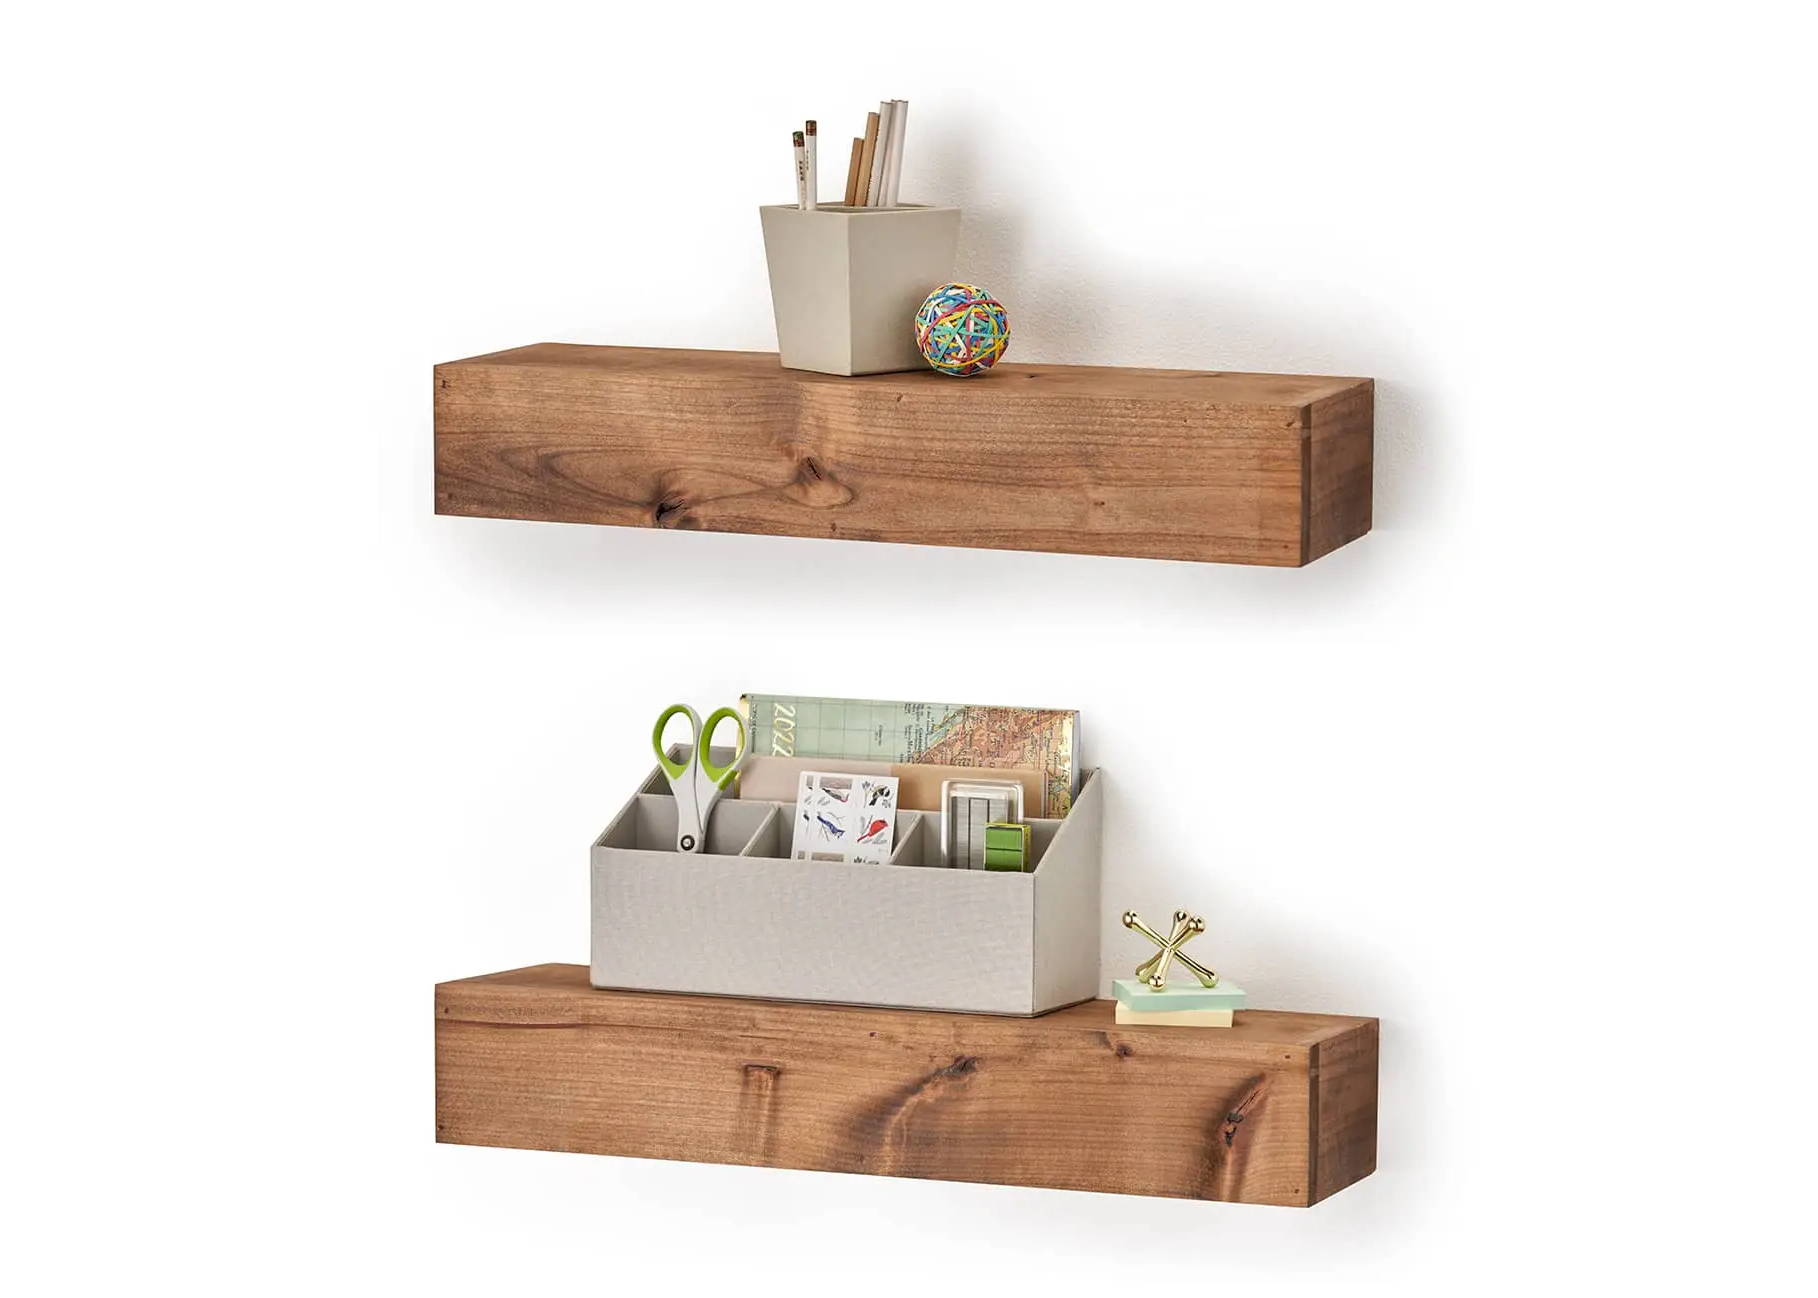 Office supplies and trinkets on the wal floating shelves